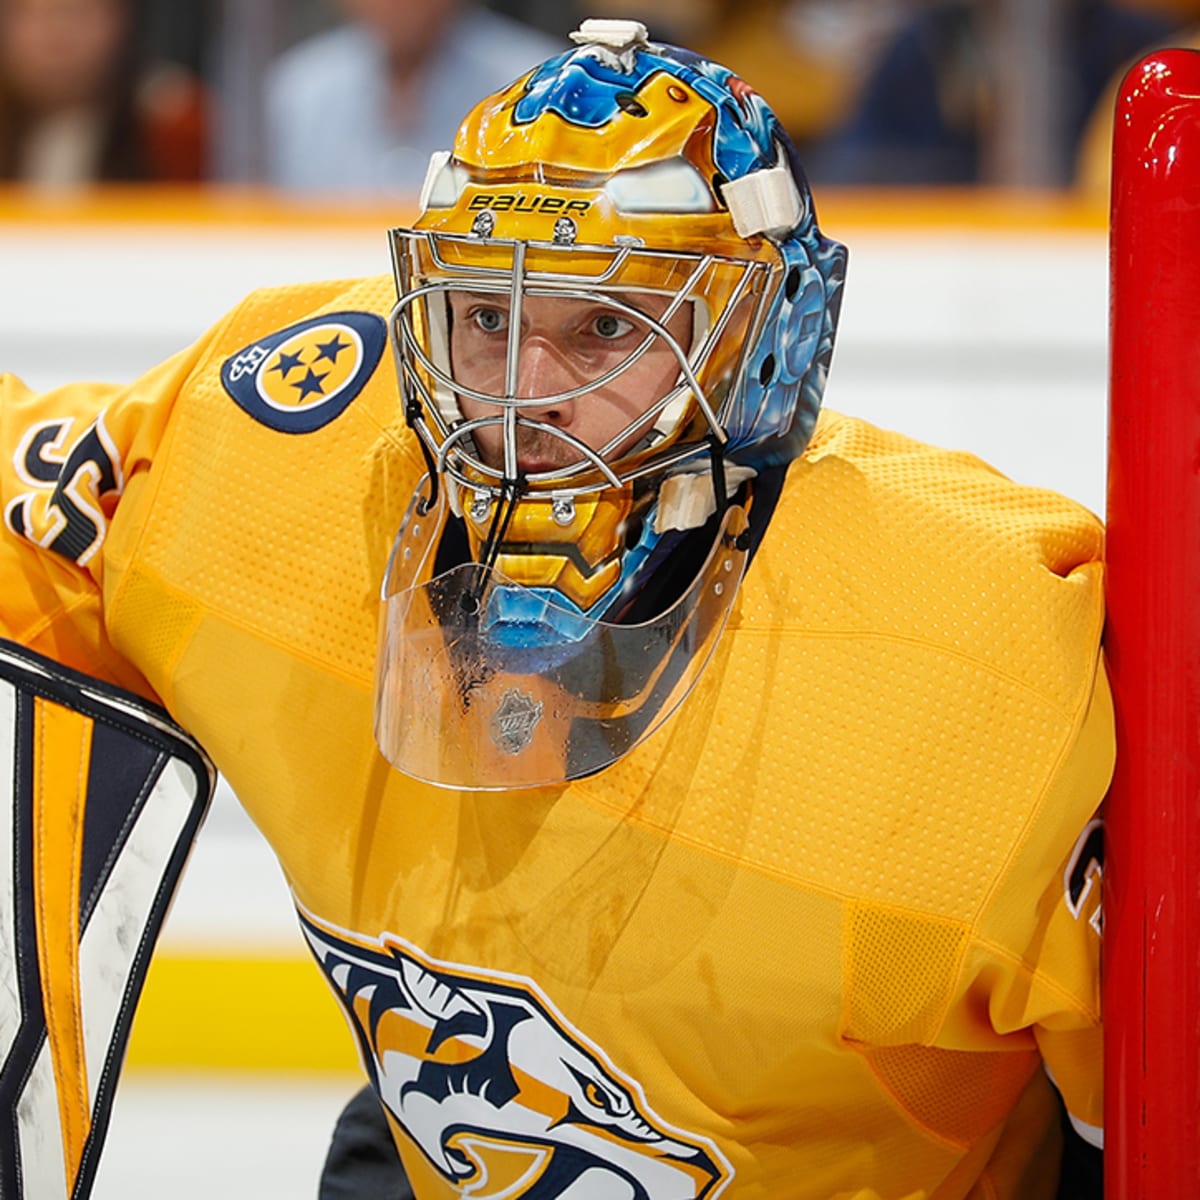 Predator goalie Pekka Rinne's jersey is headed to outer space